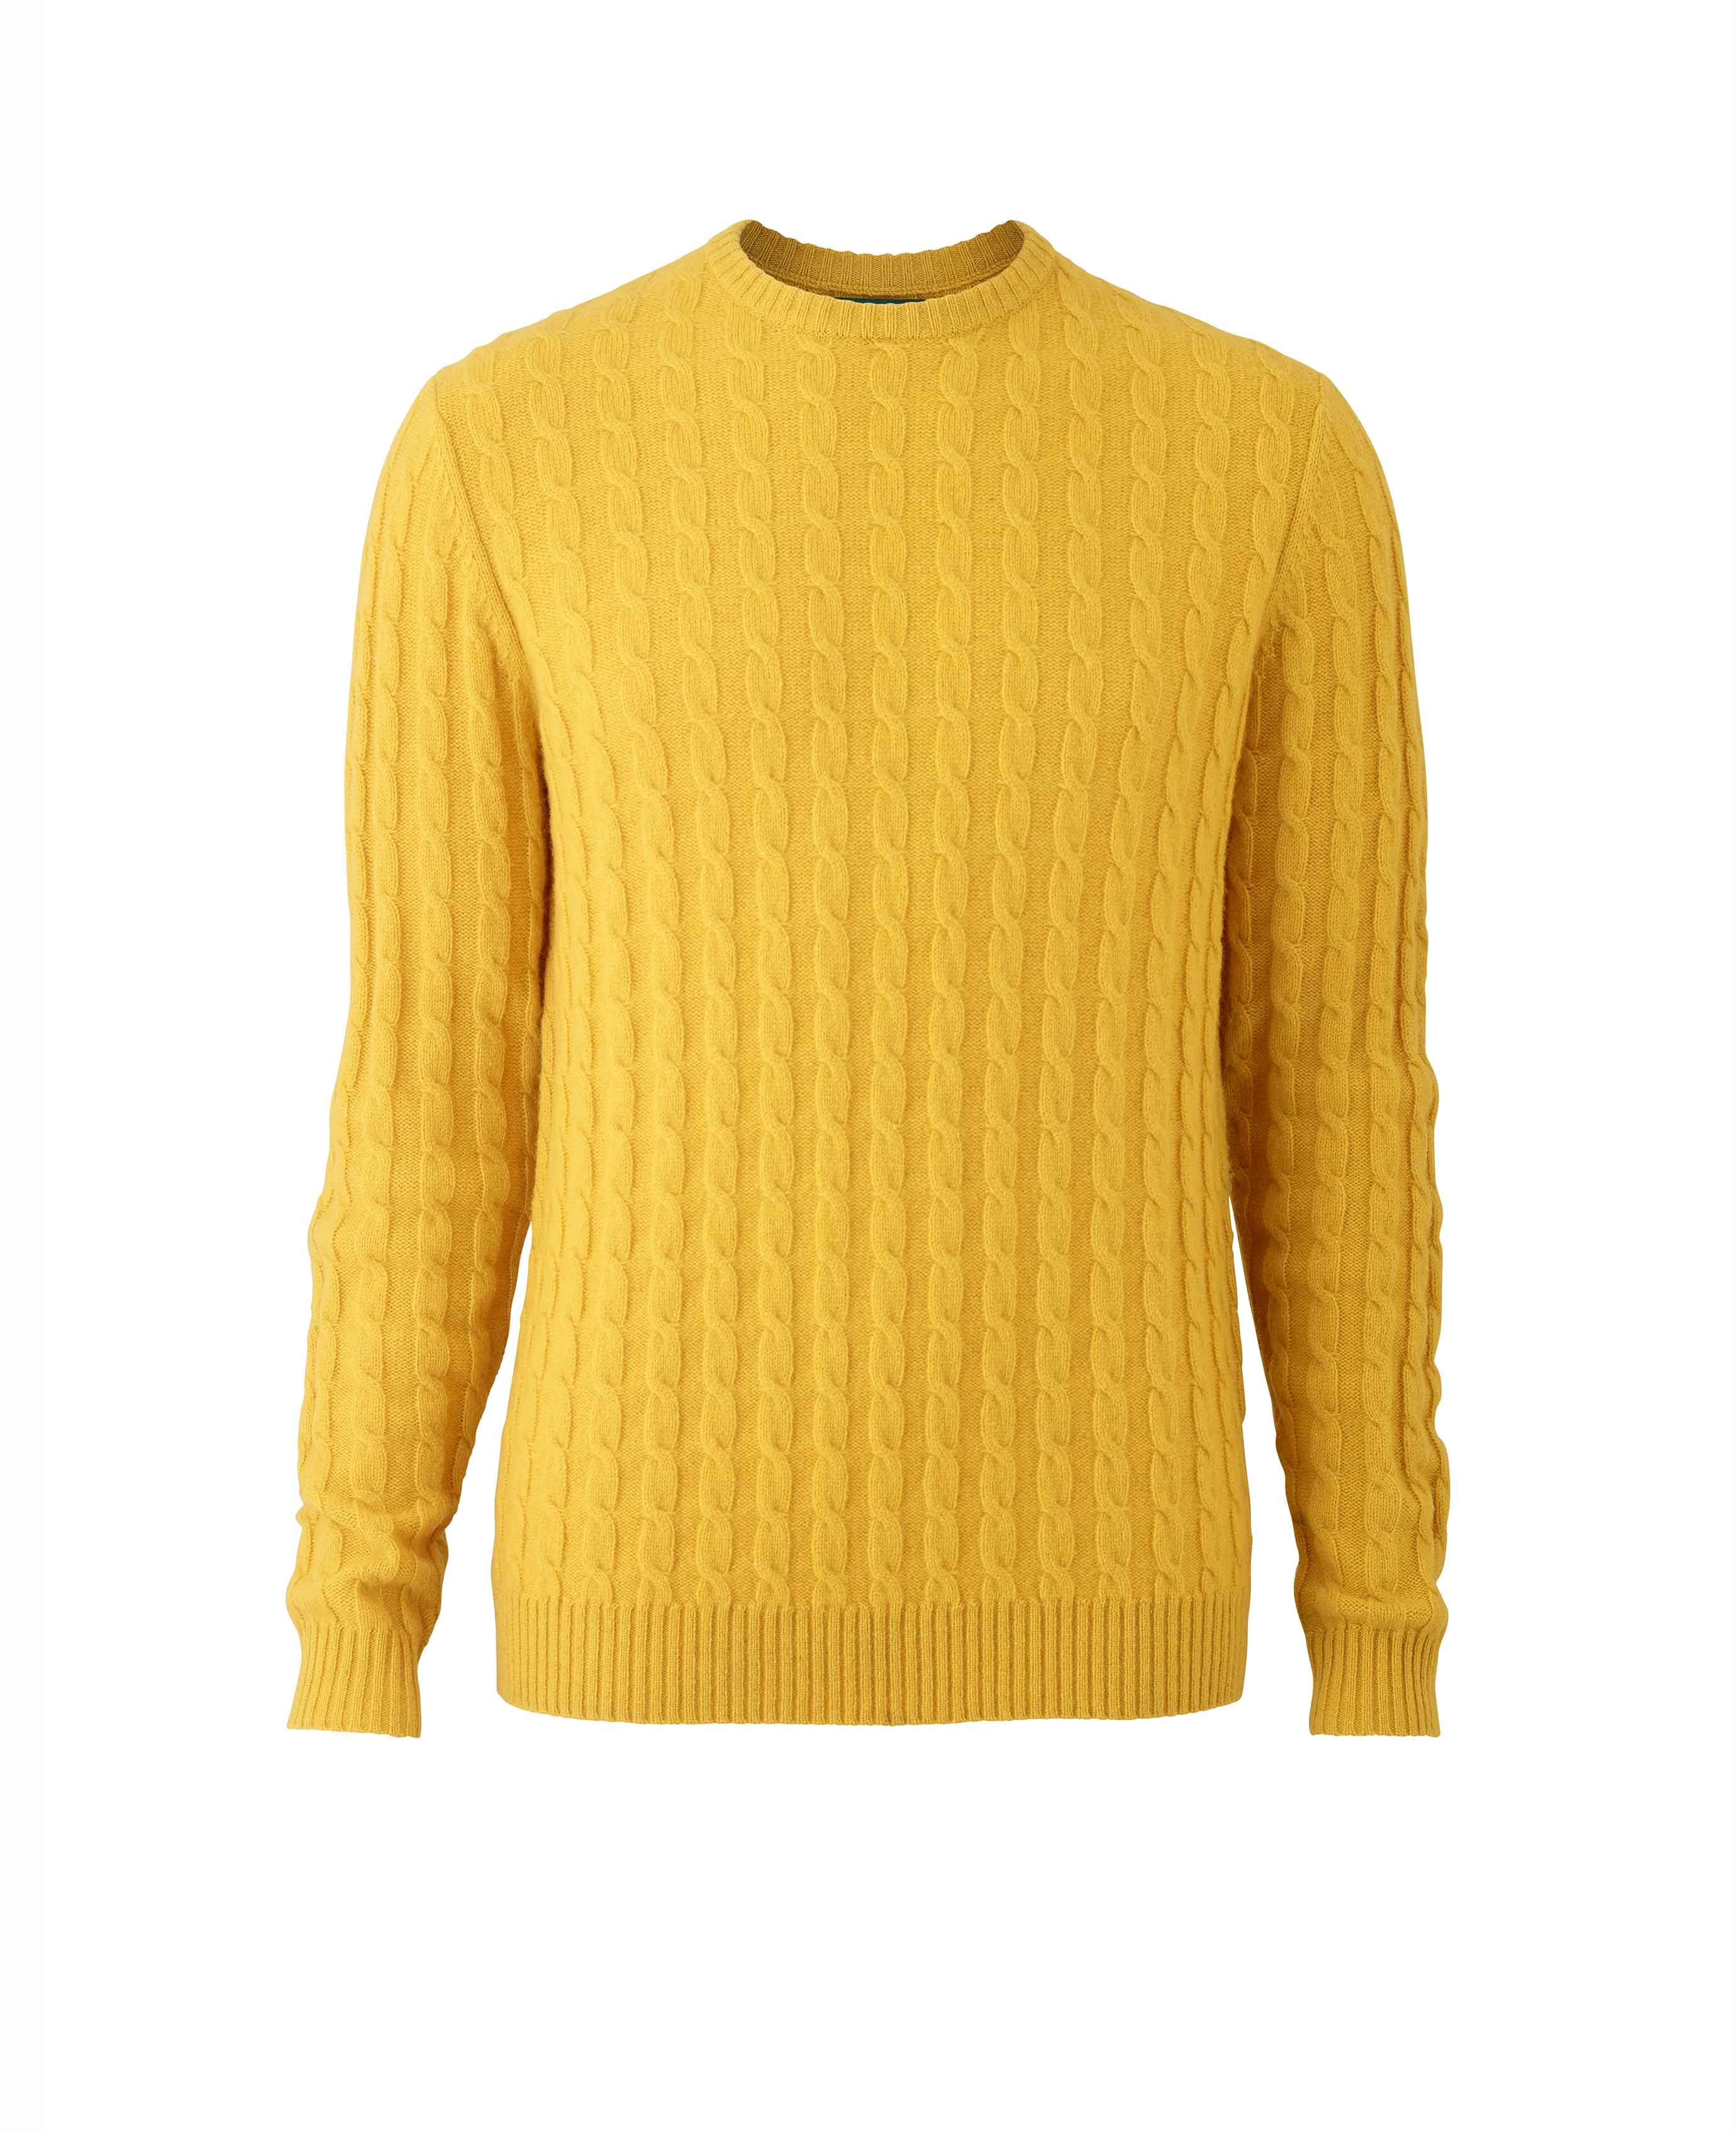 Men's Mustard Lambswool Blend Cable Knit Jumper | Savile Row Co